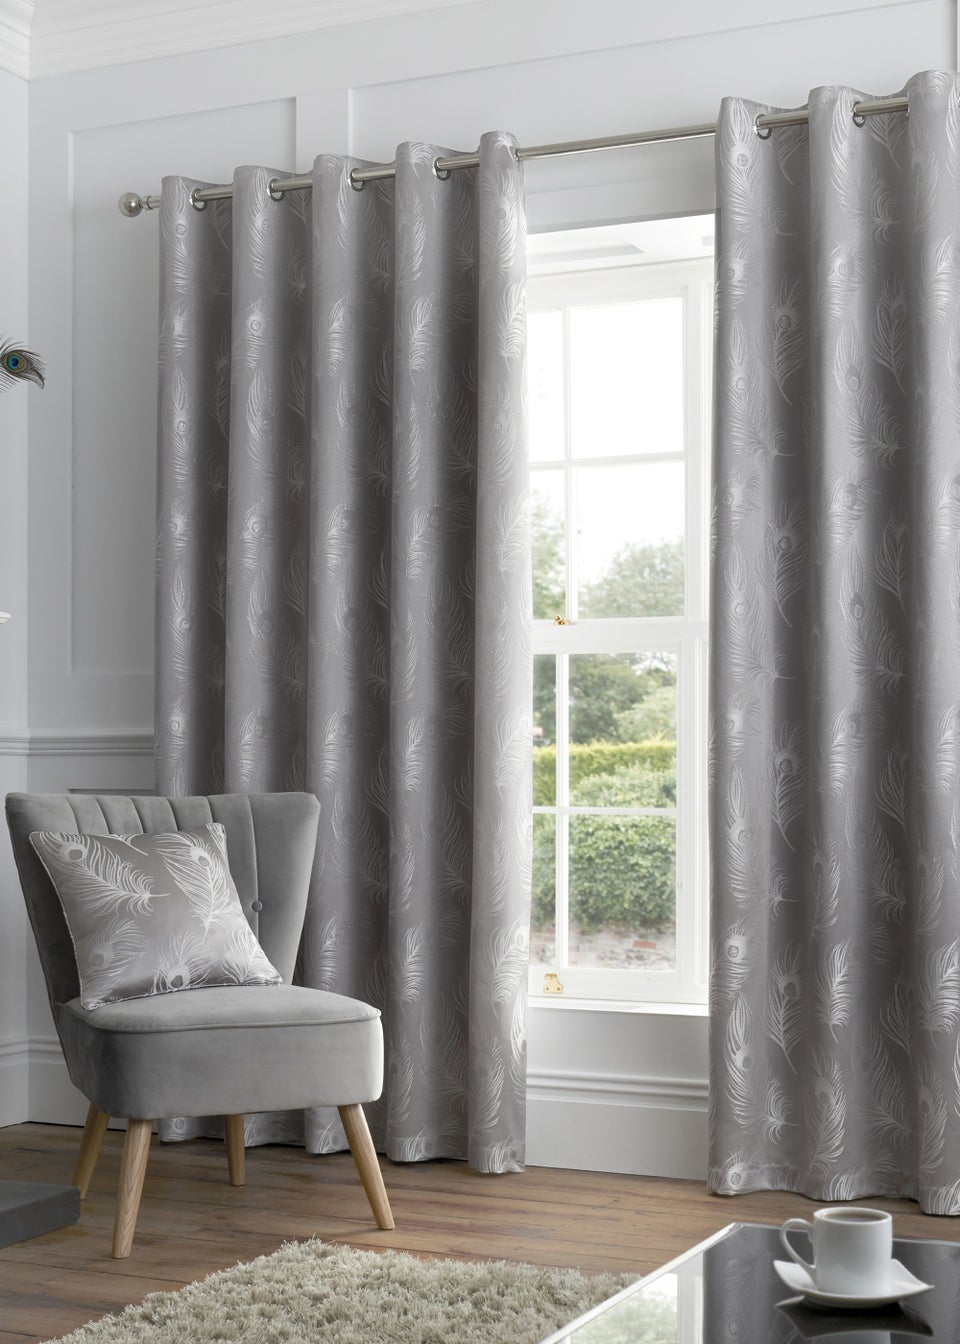 Curtina Feather Eyelet Curtains